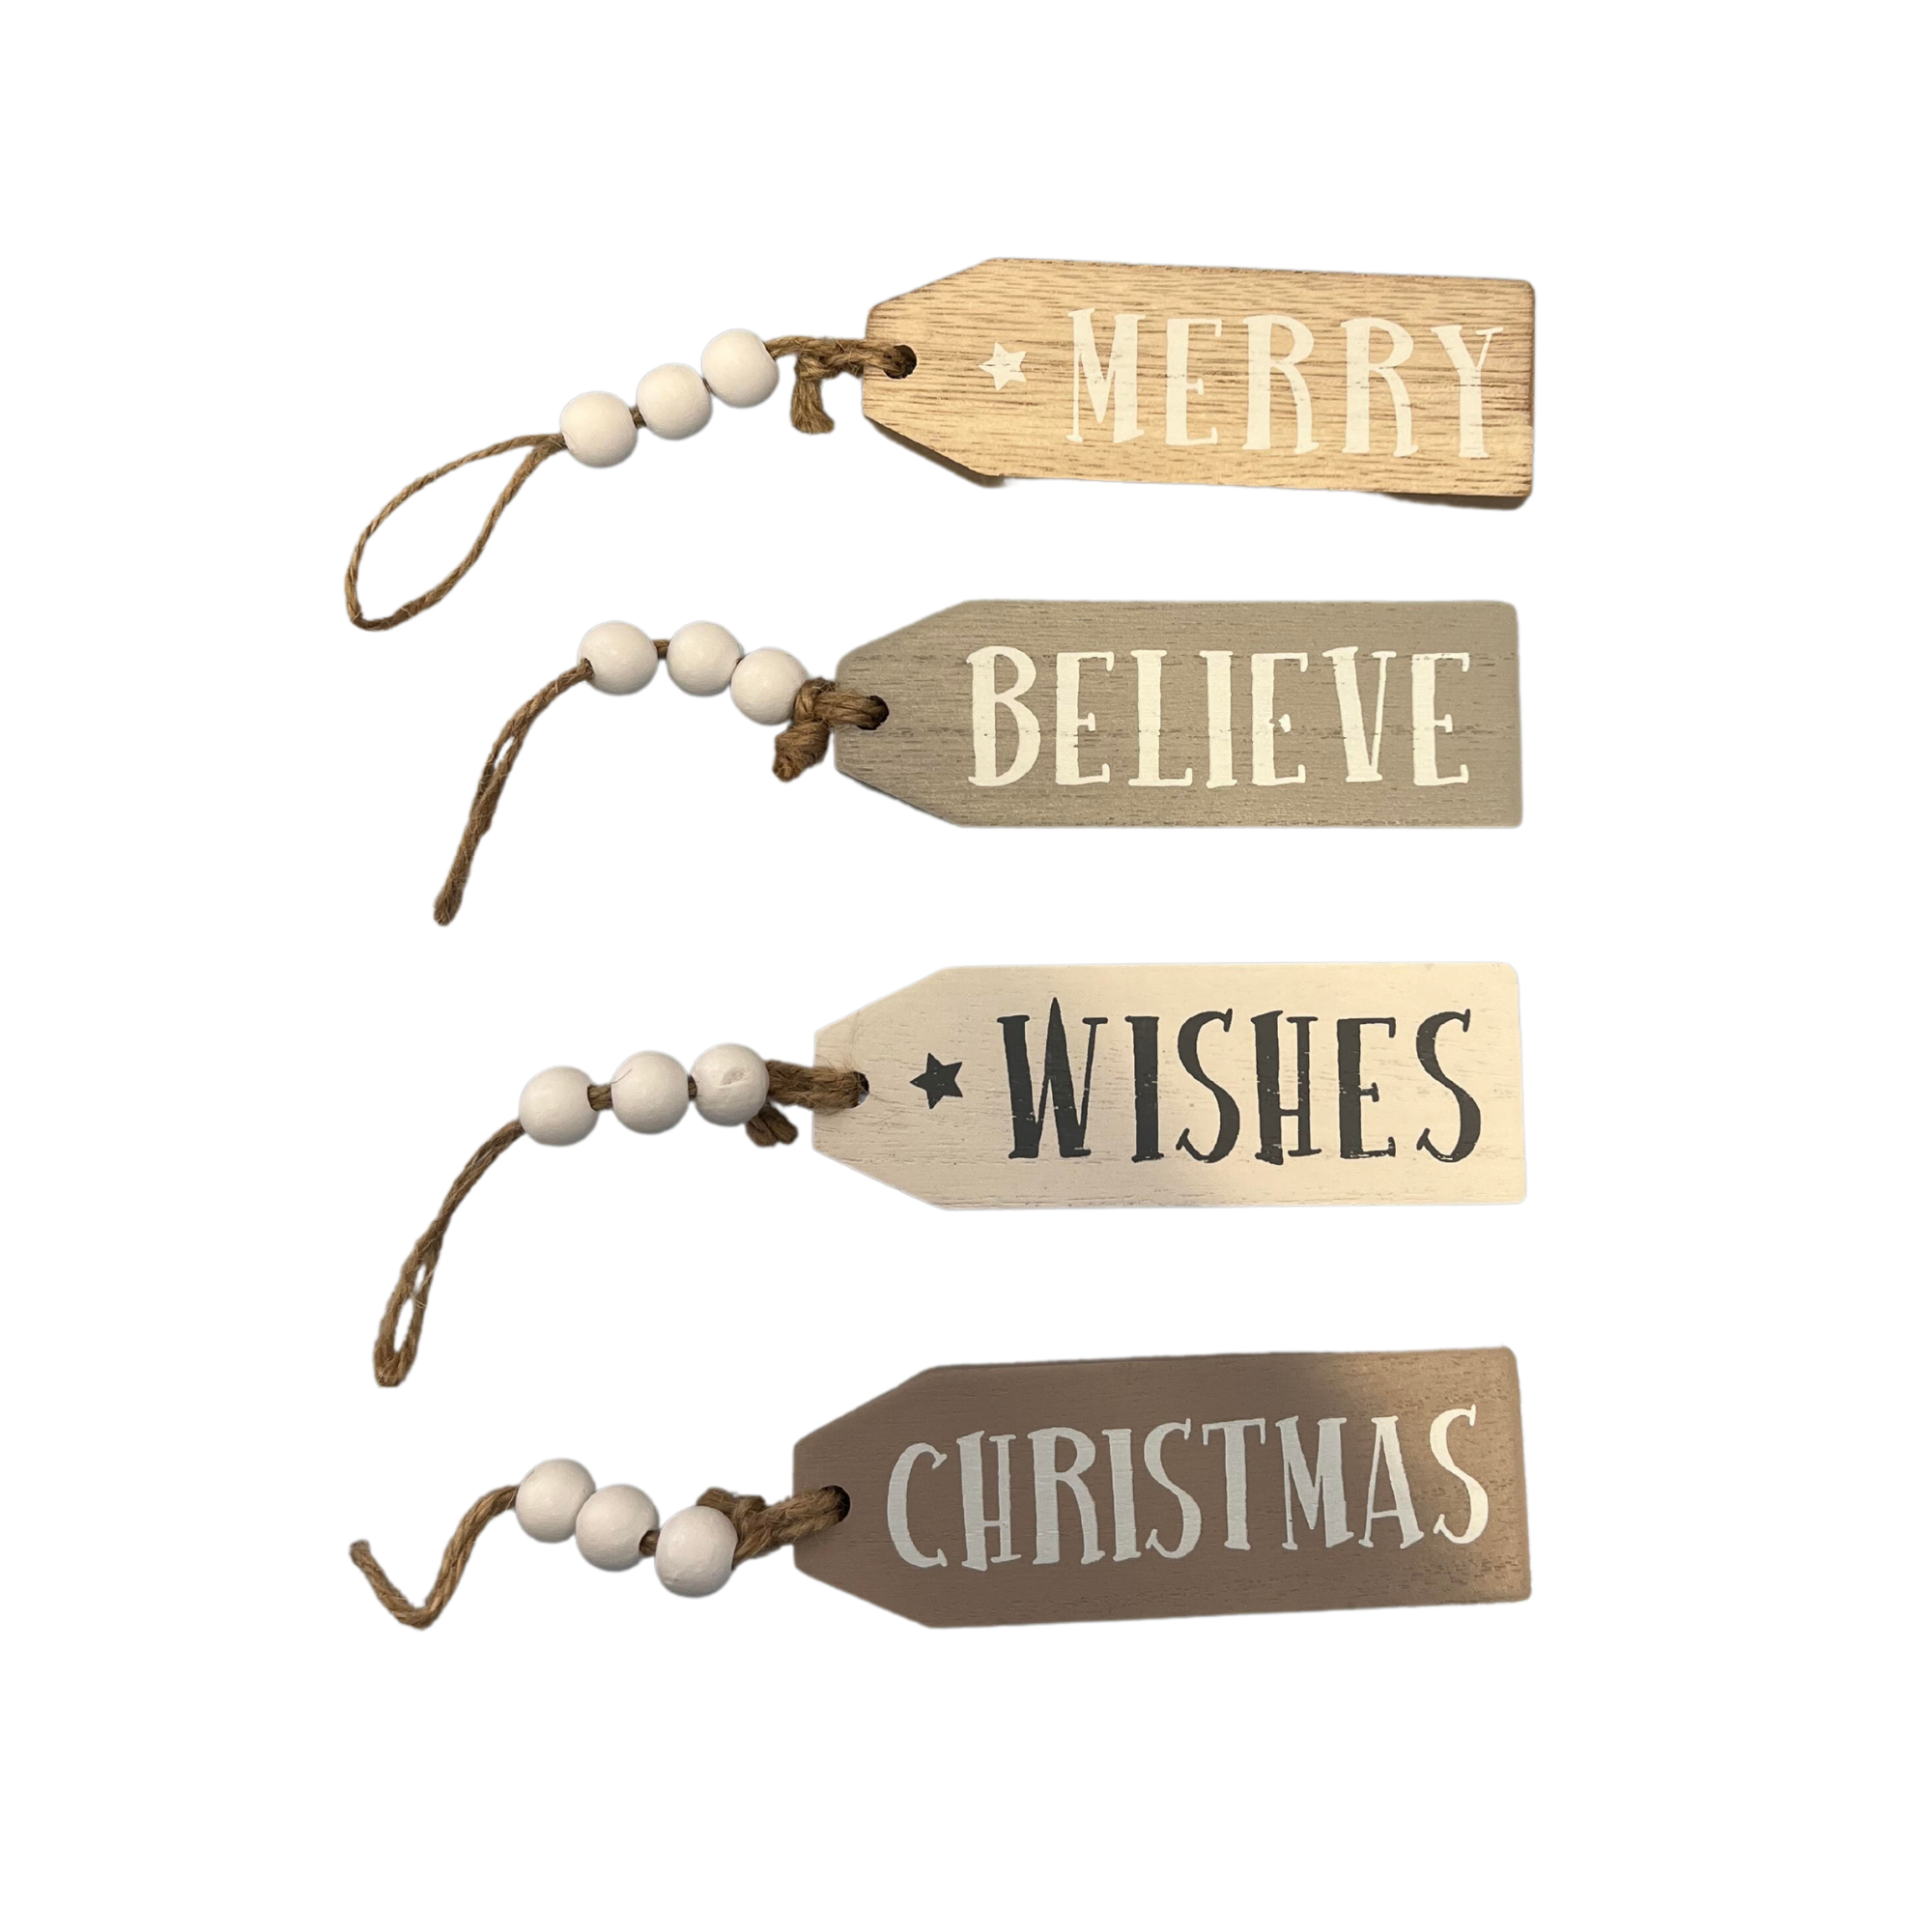 Wooden Decorative Festive Inspired Tag - Sold Singly - Choose from Merry, Believe, Christmas or Wishes